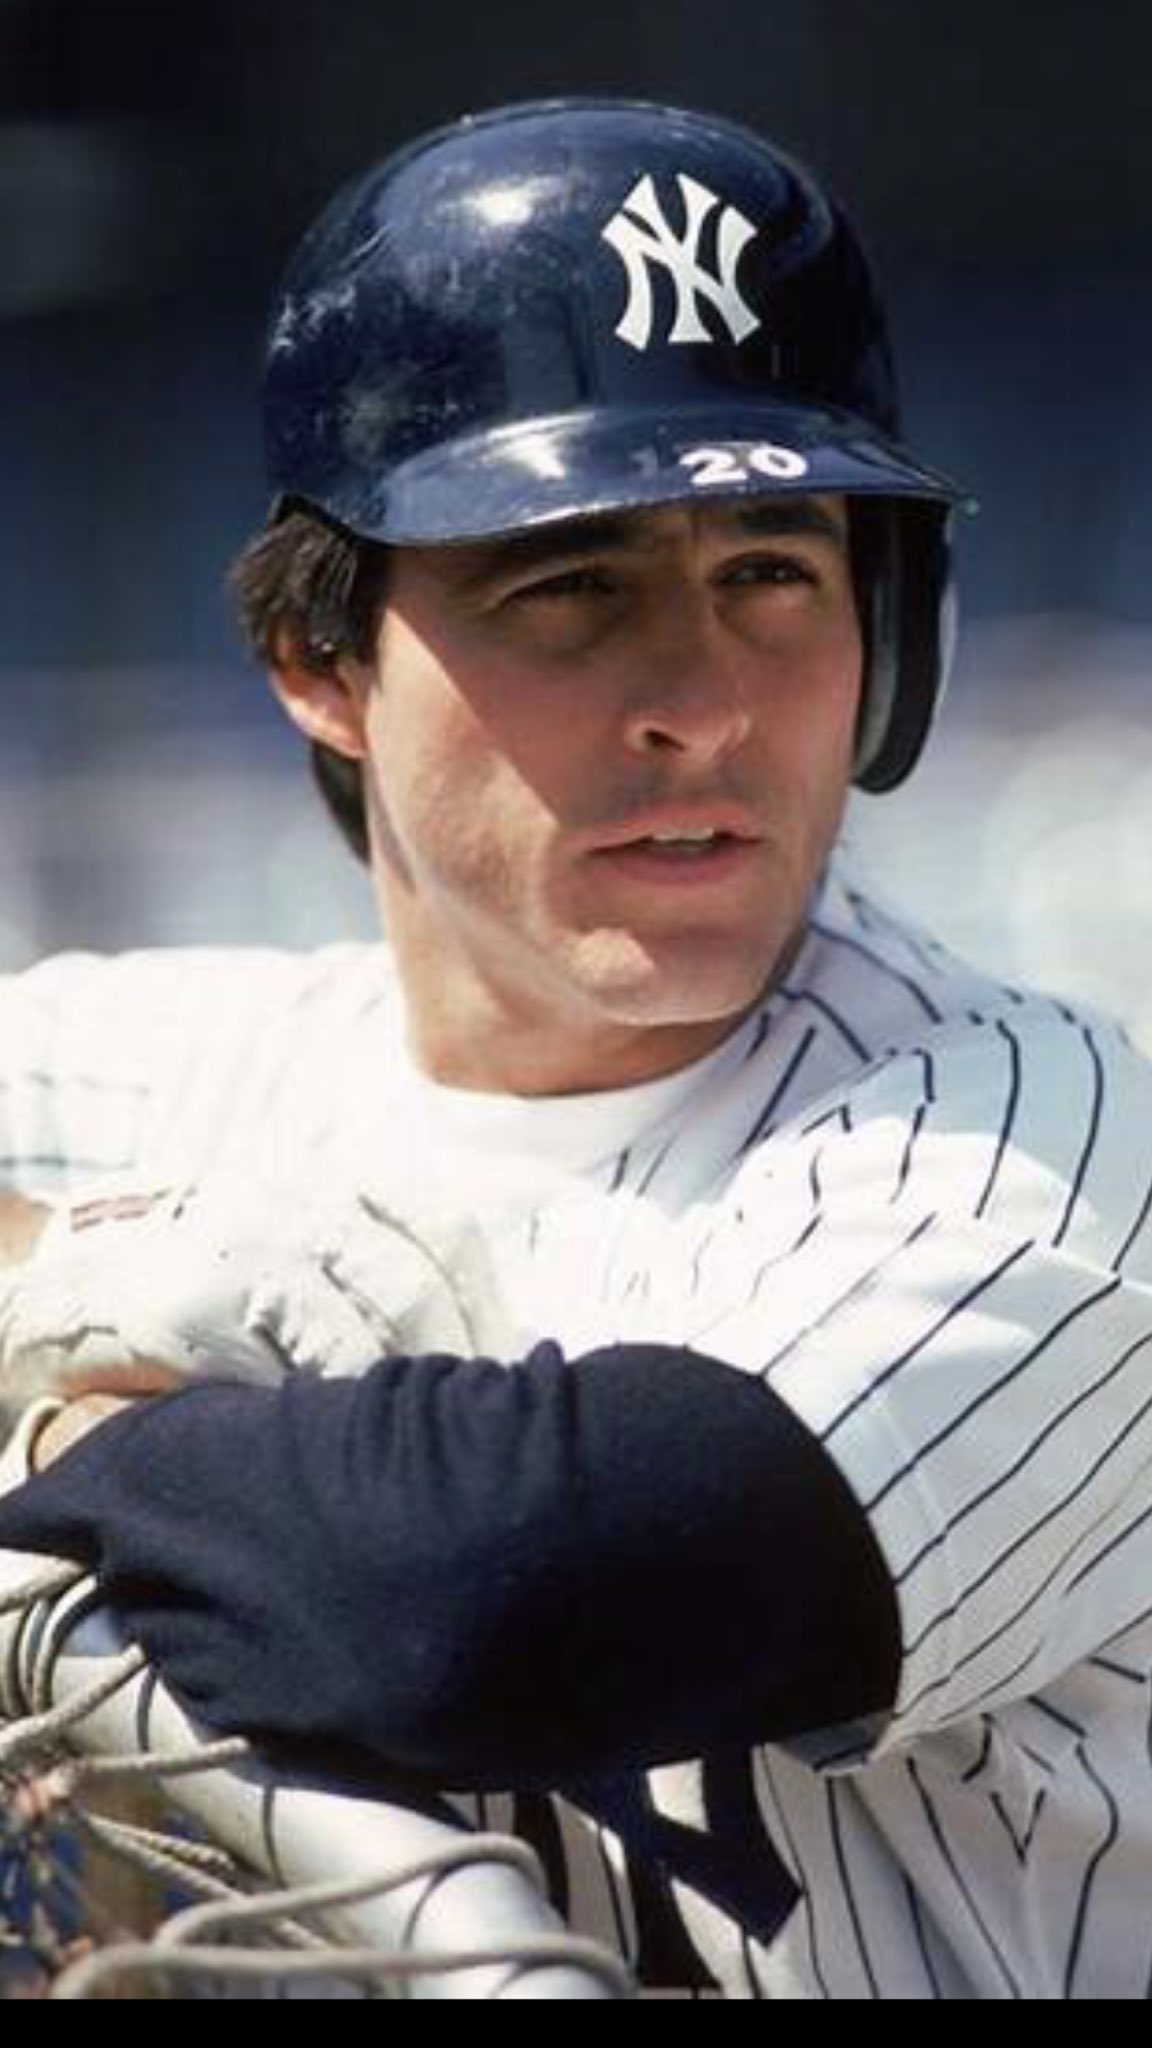 Coach on X: Tuesday's Teammate Bucky Dent Apologies to @RedSox